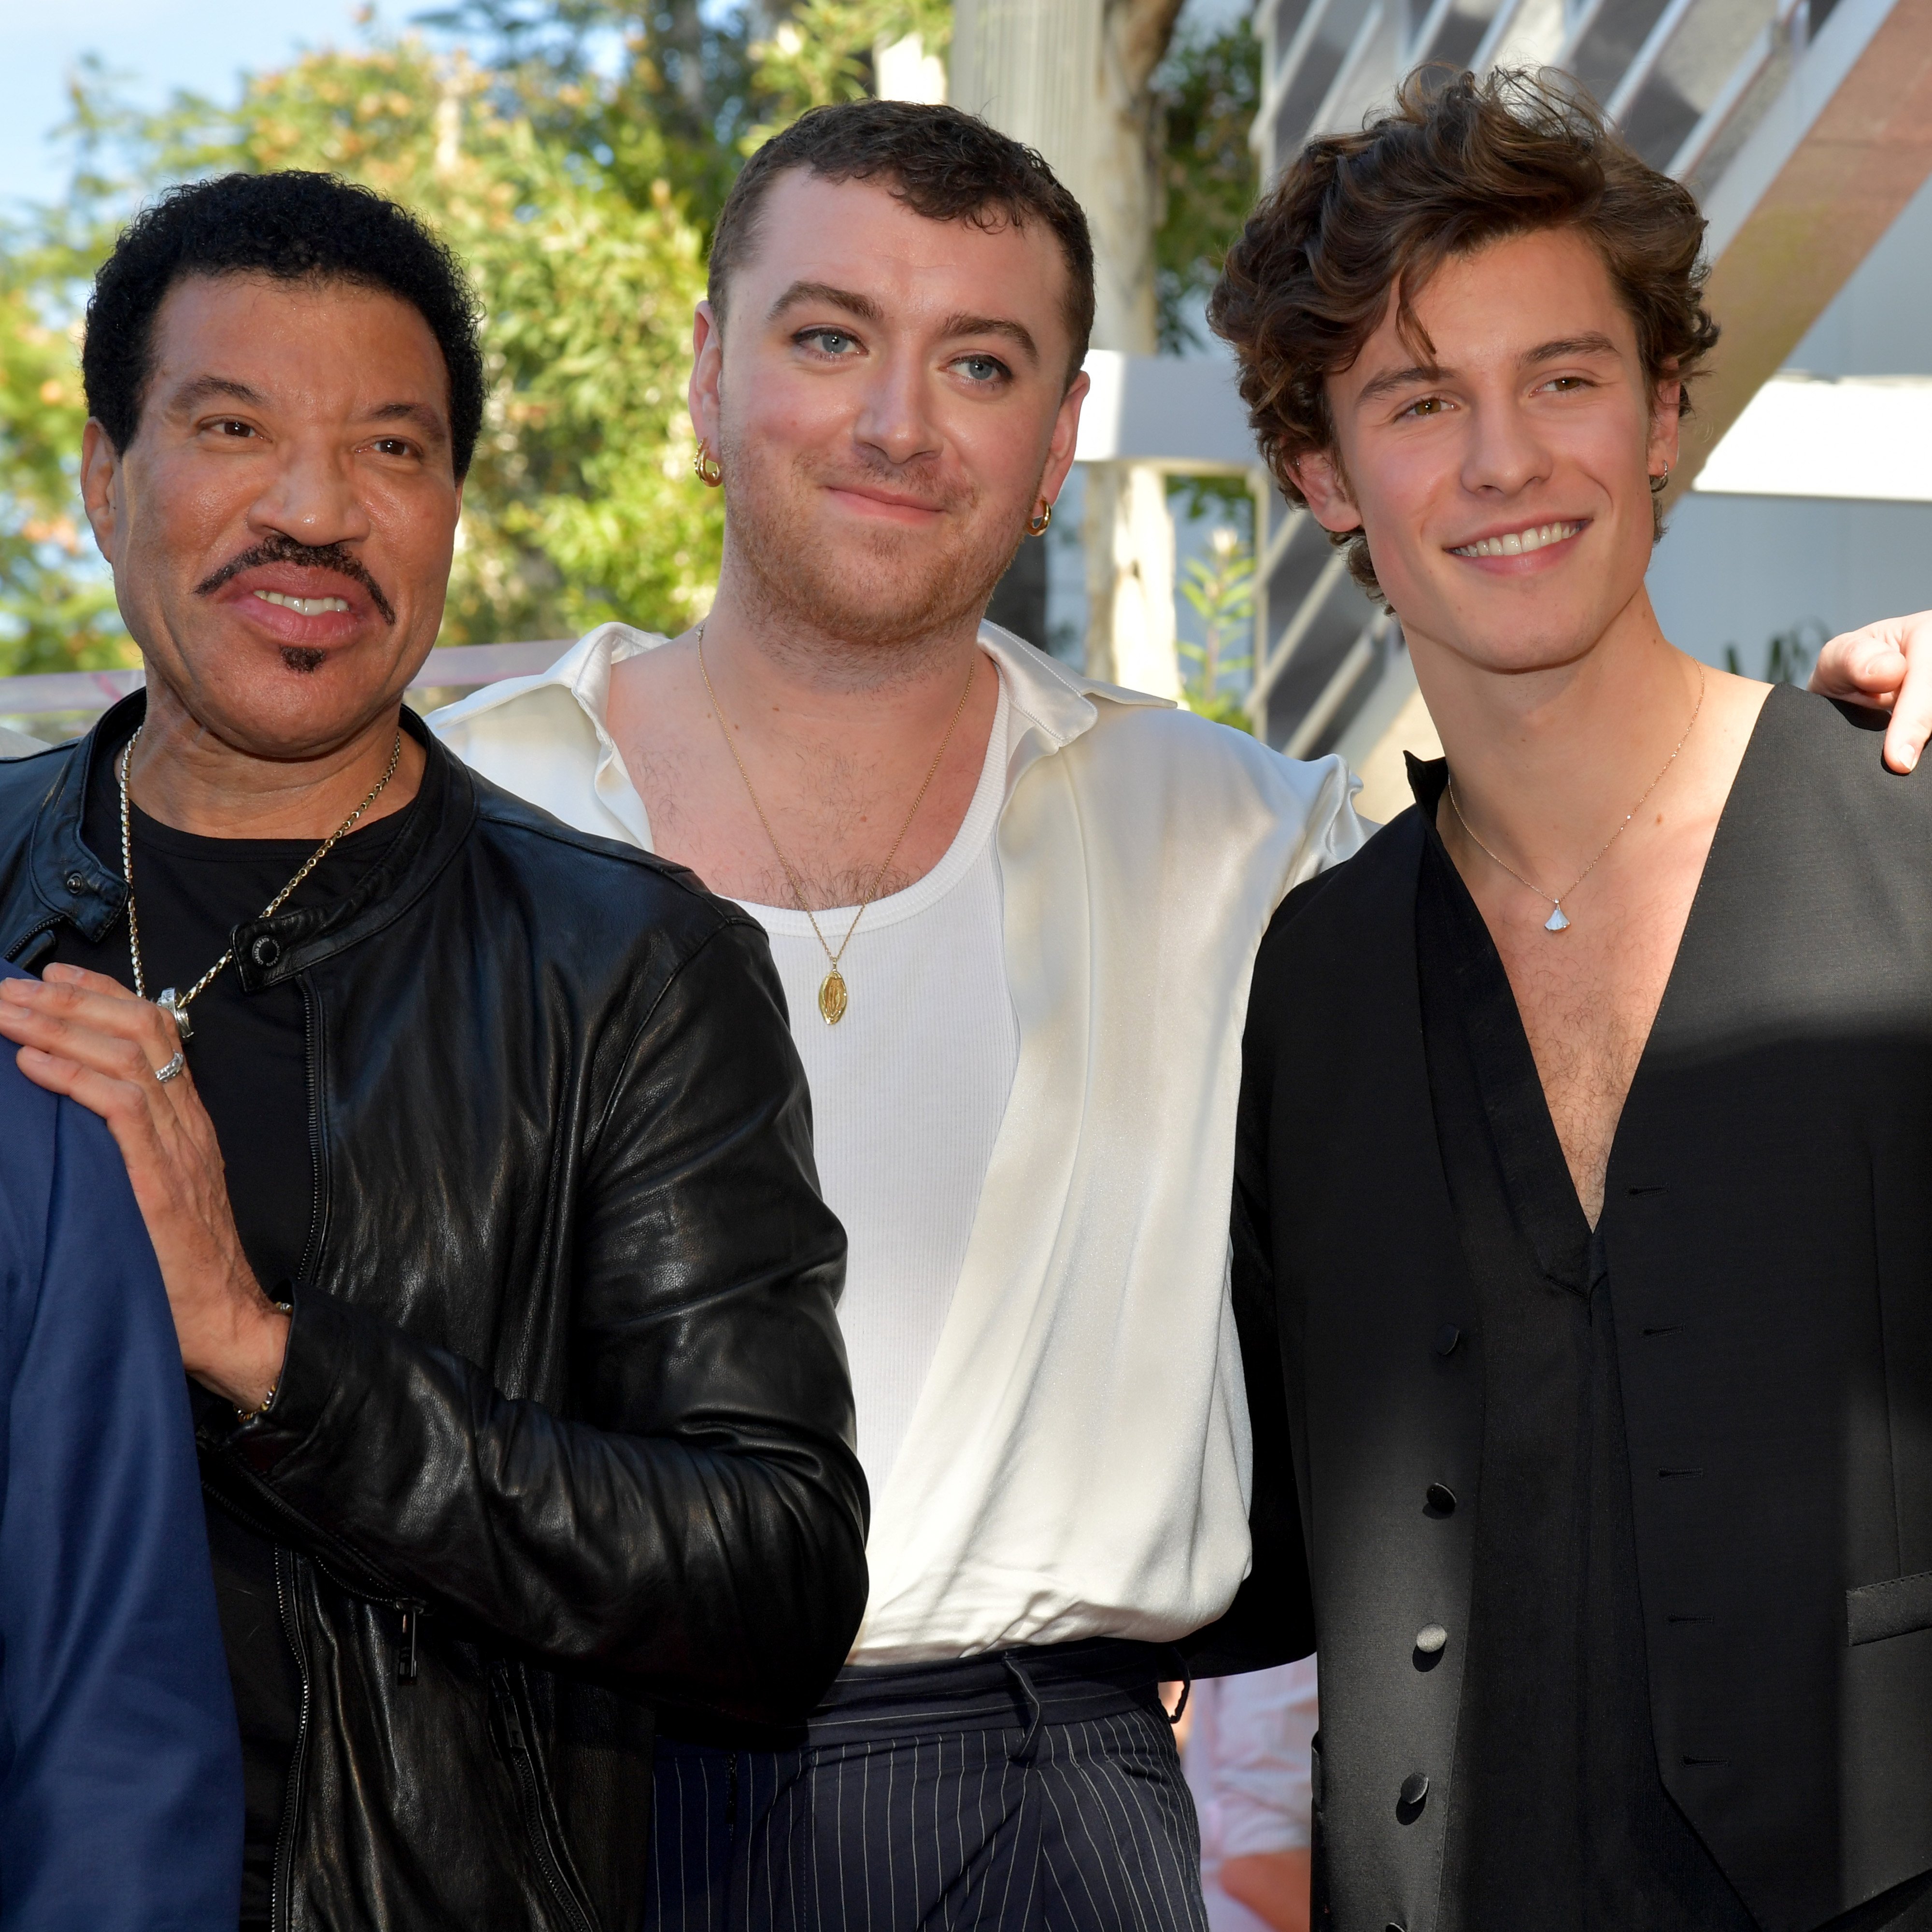 Lionel Richie, Sam Smith, and Shawn Mendes